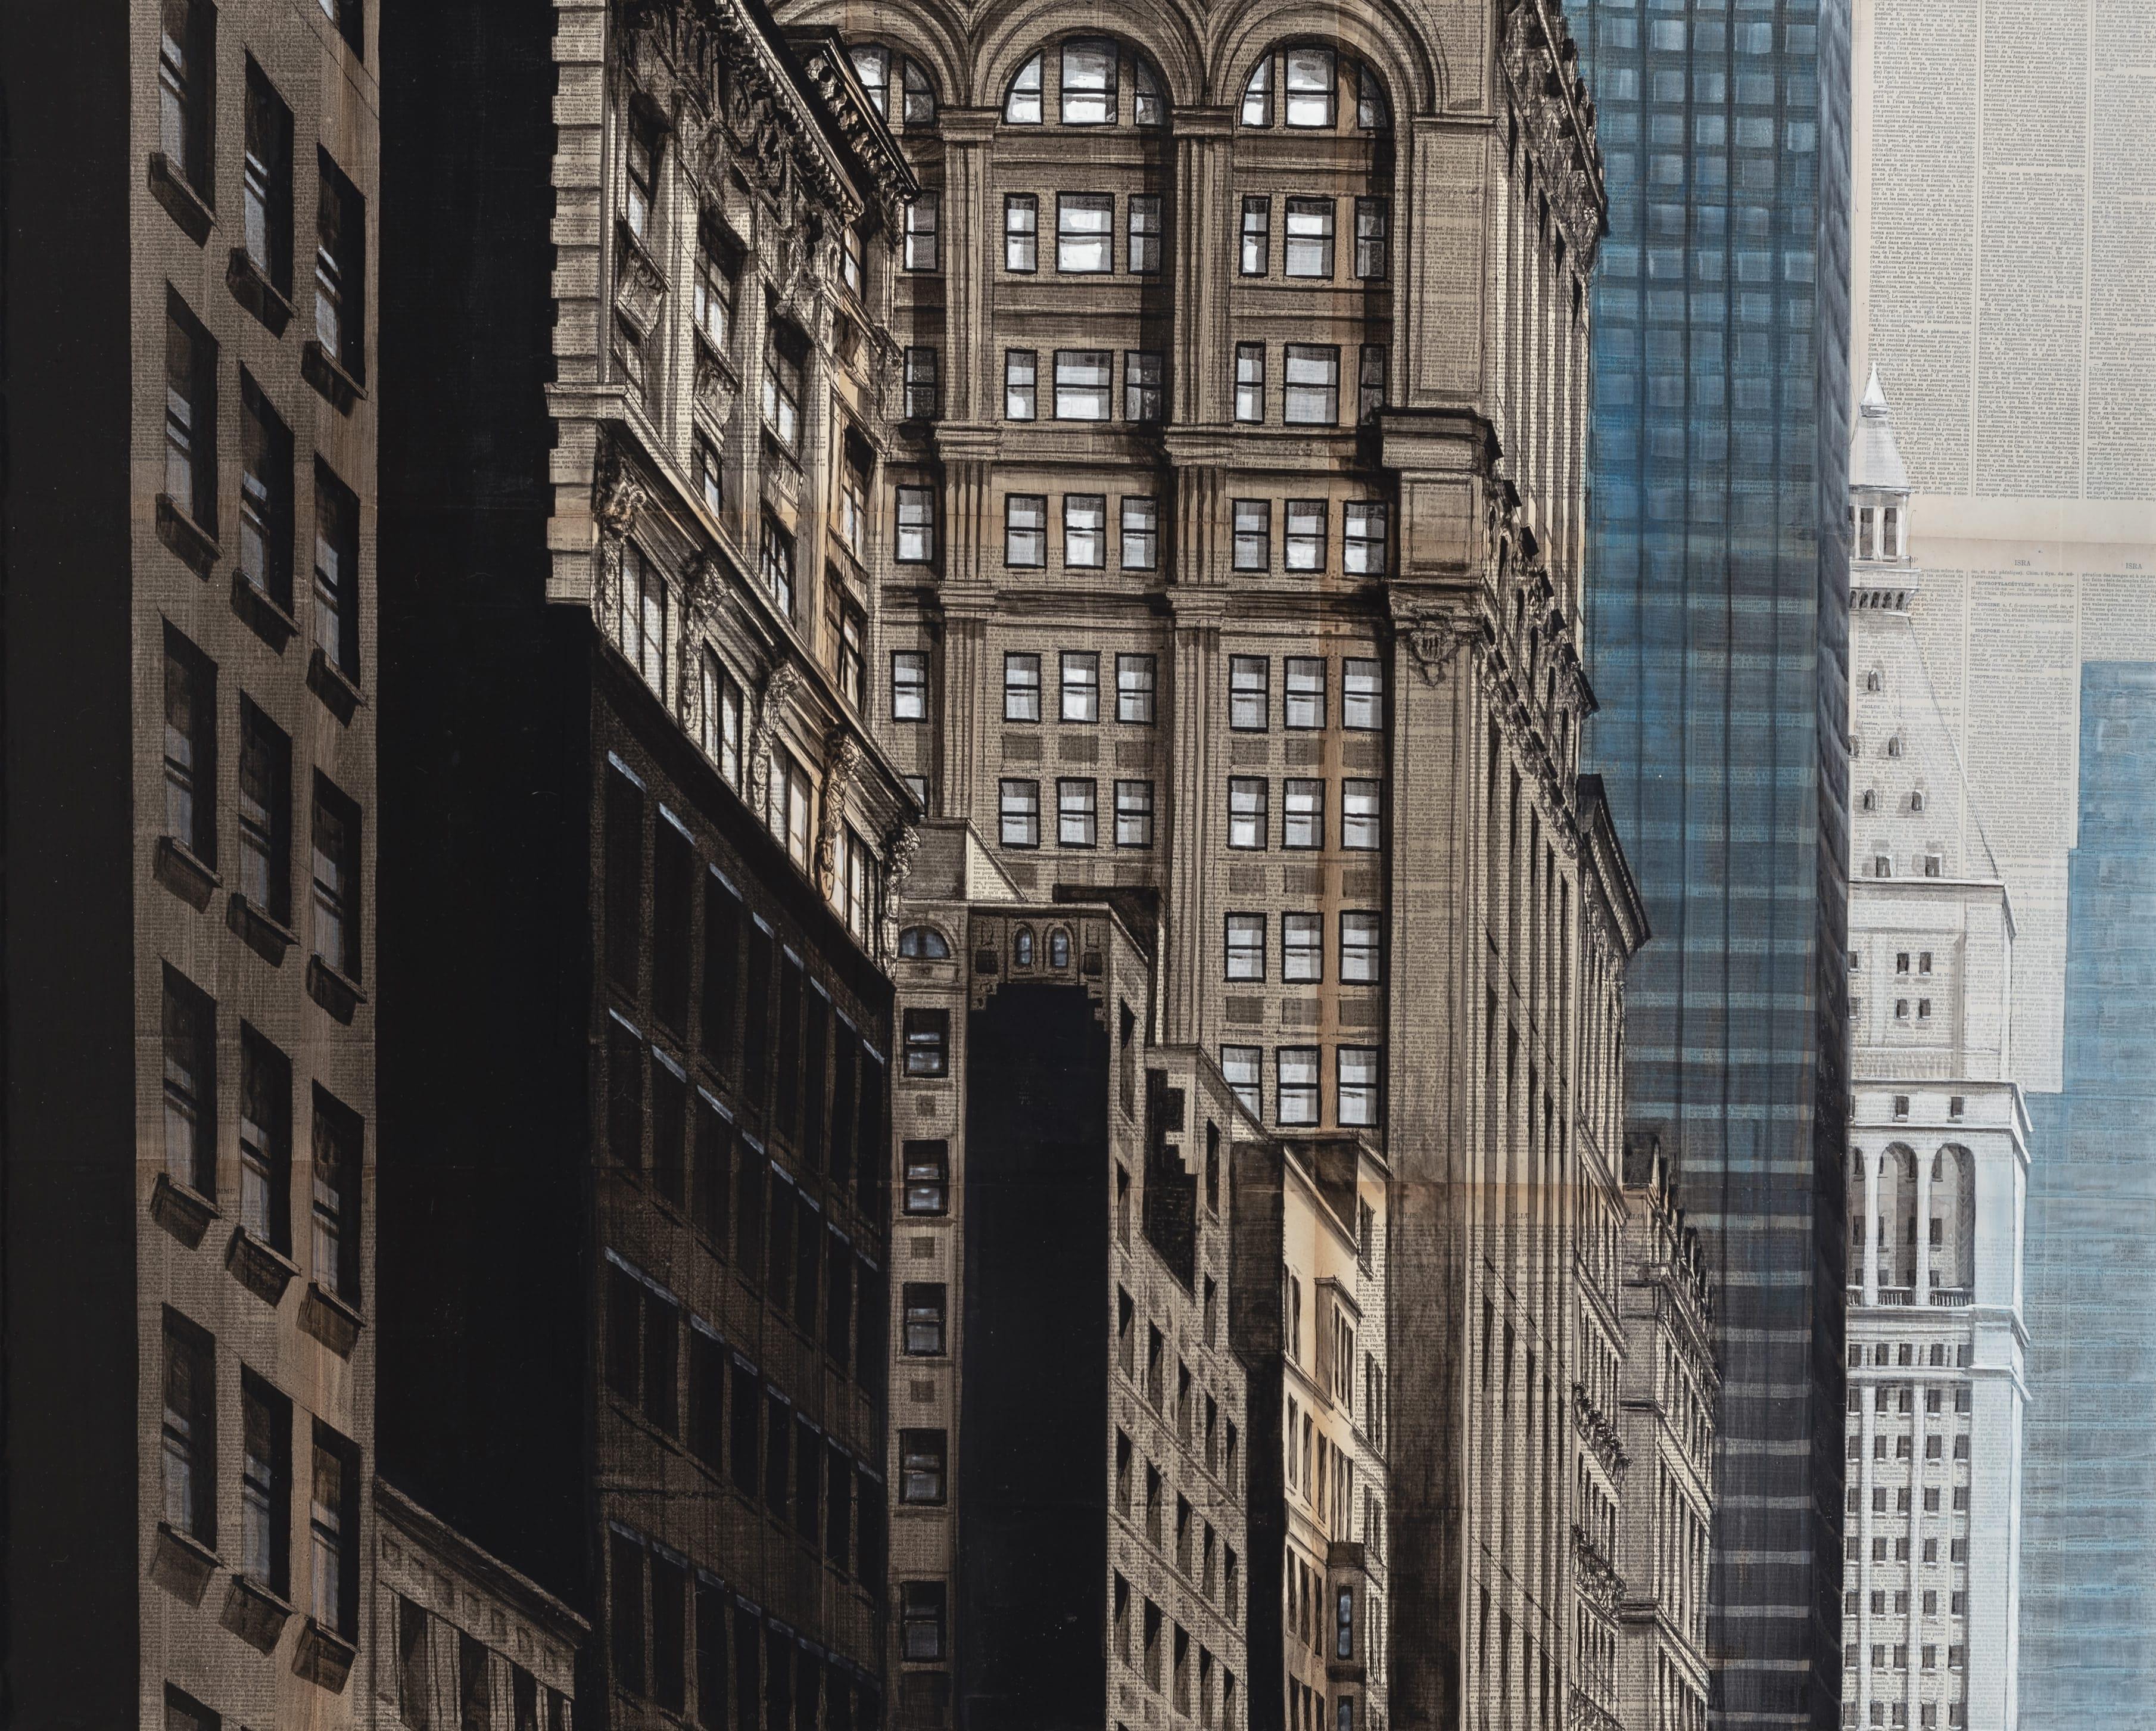 Gothica by Guillaume Chansarel - Urban Landscape Painting, New York City